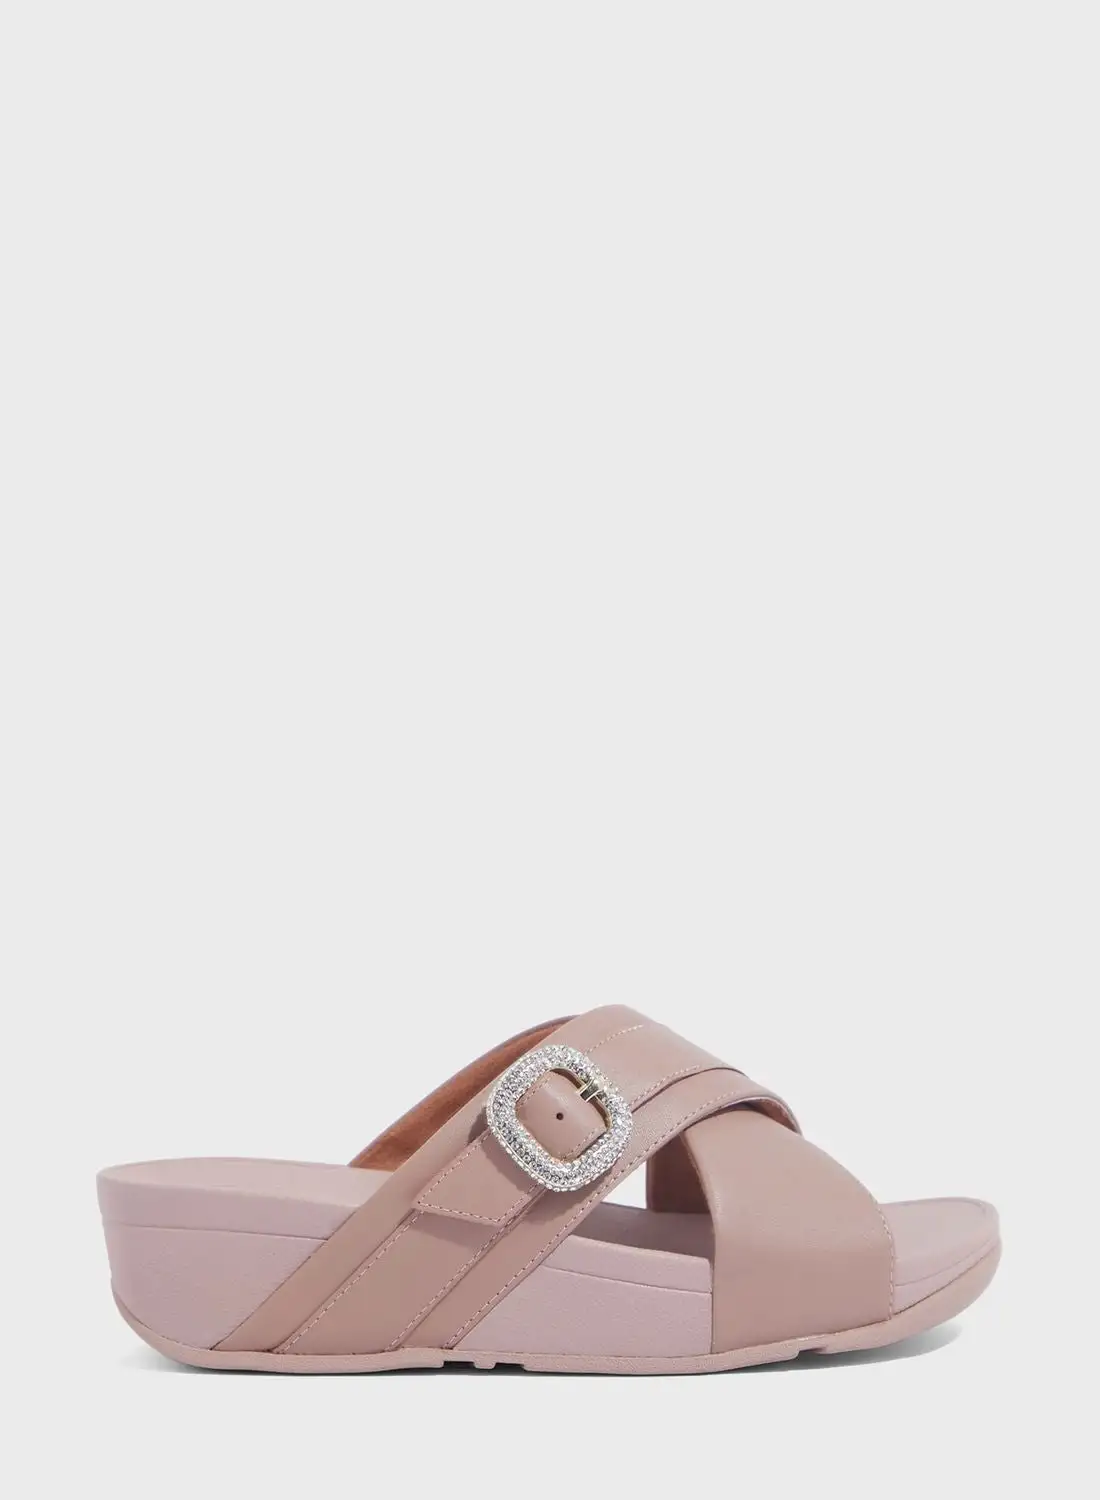 fitflop Multi Strap Wedge Sandals